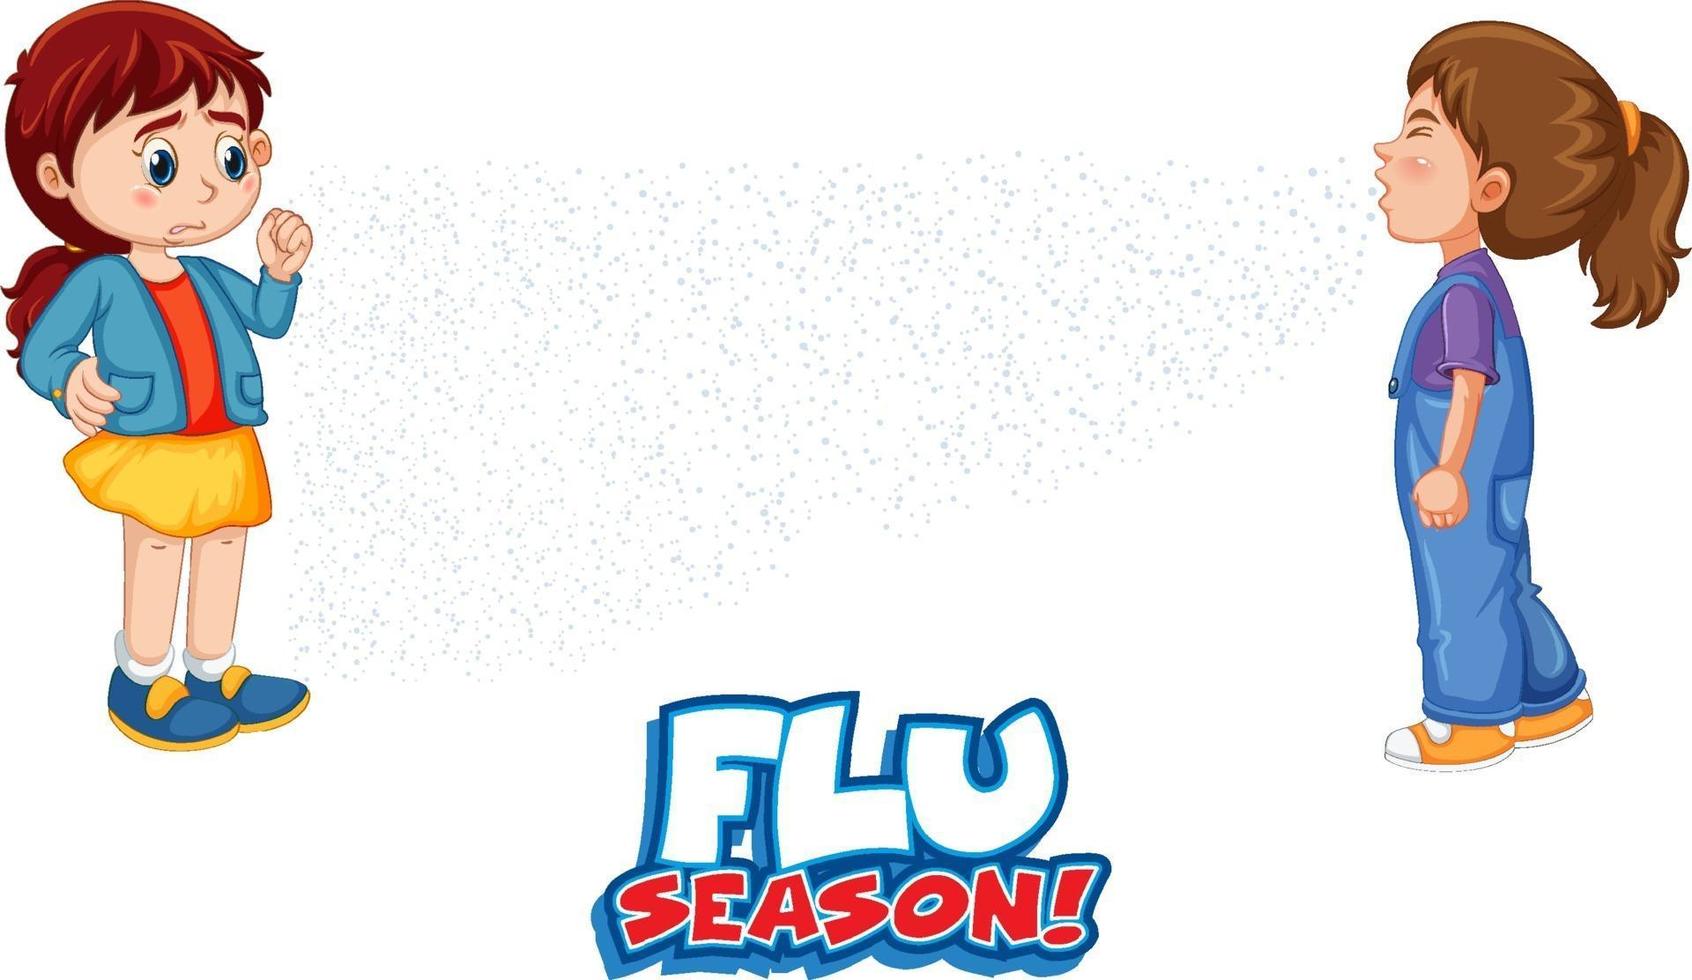 Flu Season font with a girl look at her friend sneezing vector